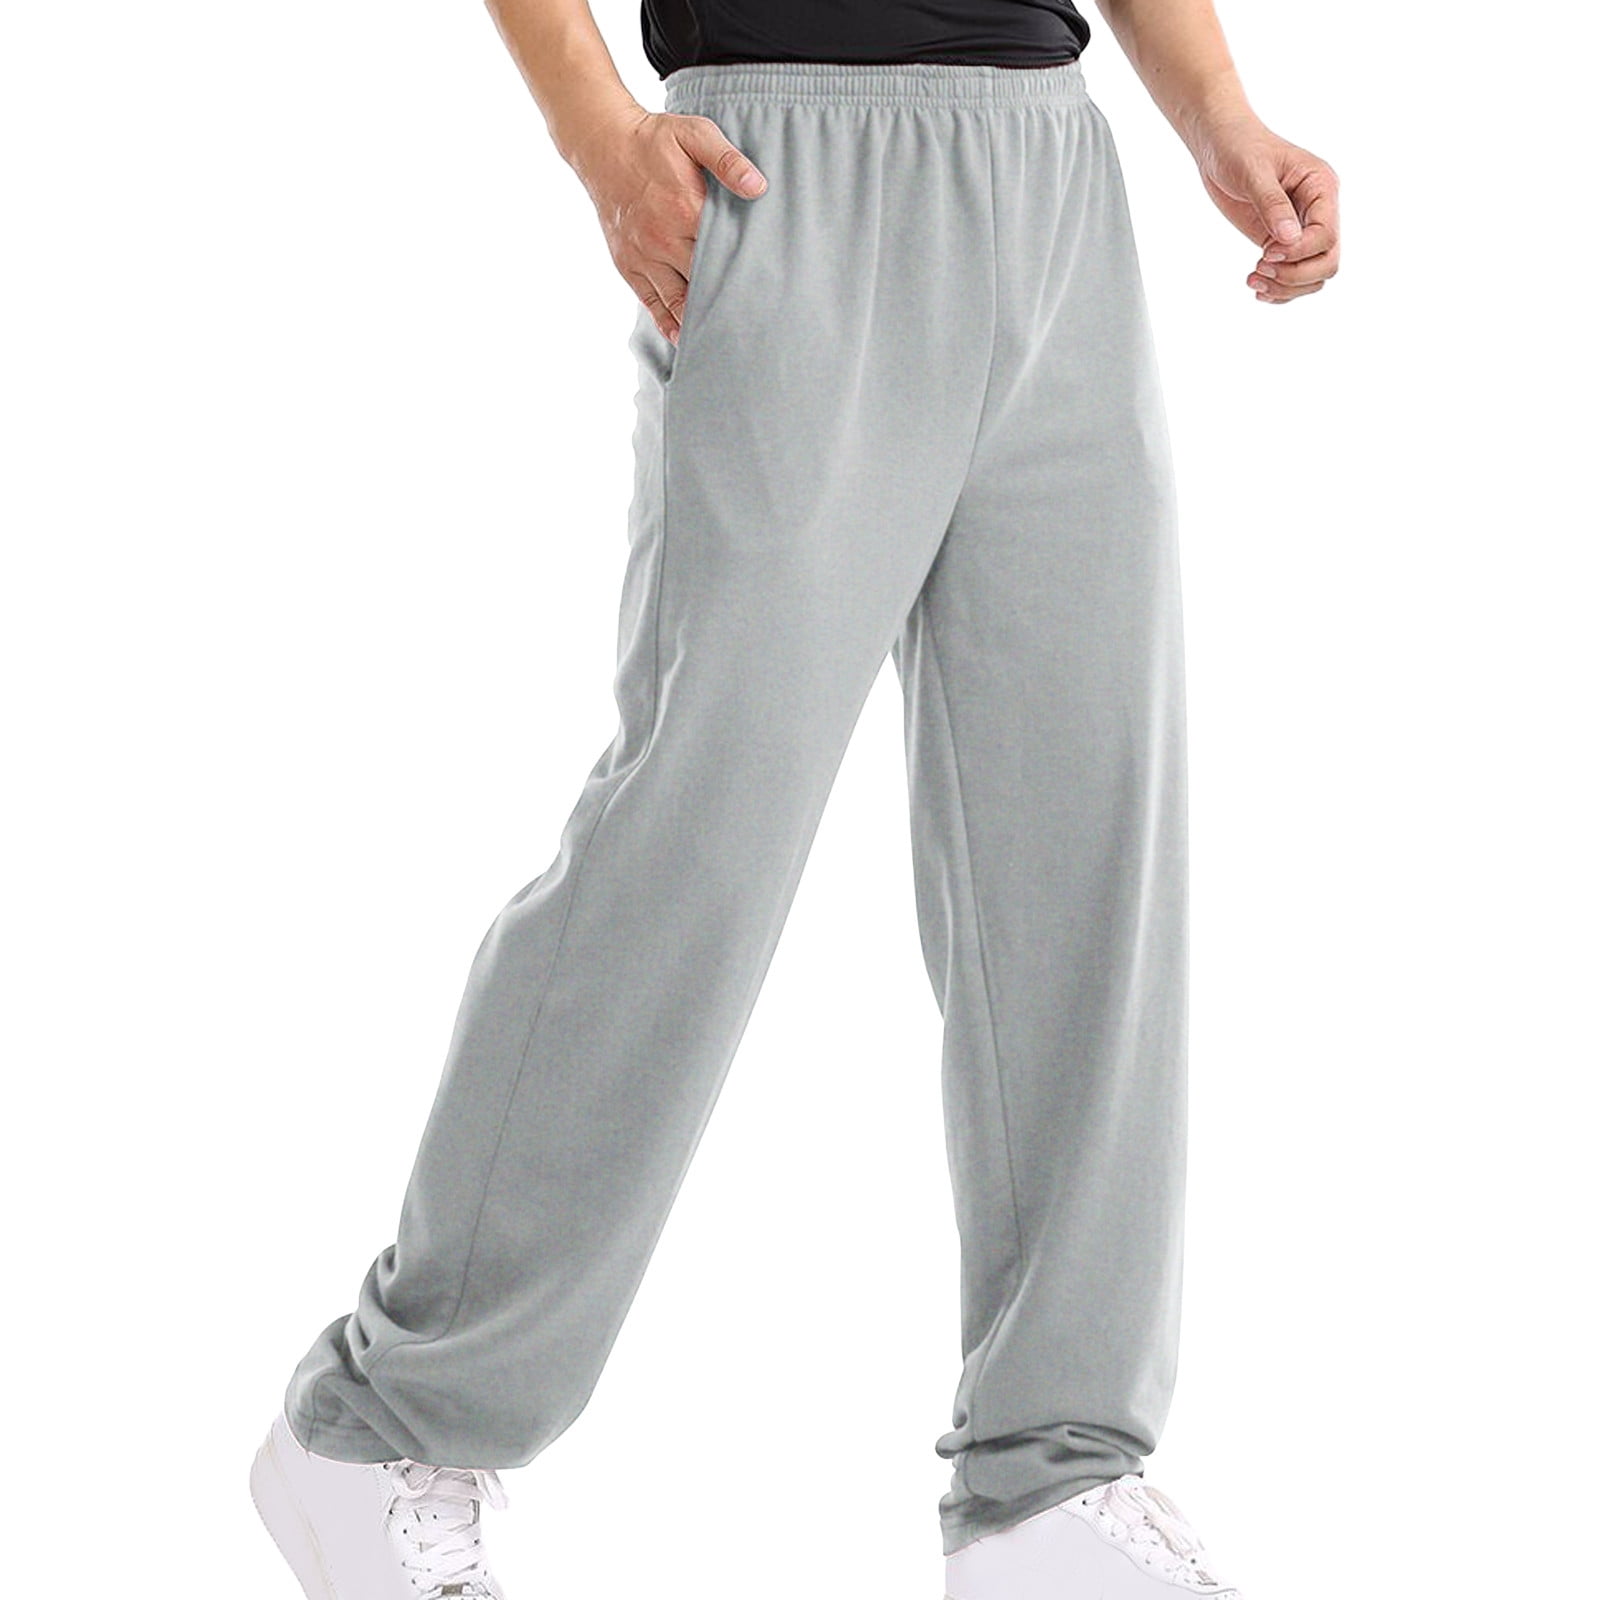 kpoplk Mens Sweatpants With Pockets,Mens Baggy Sweatpants with